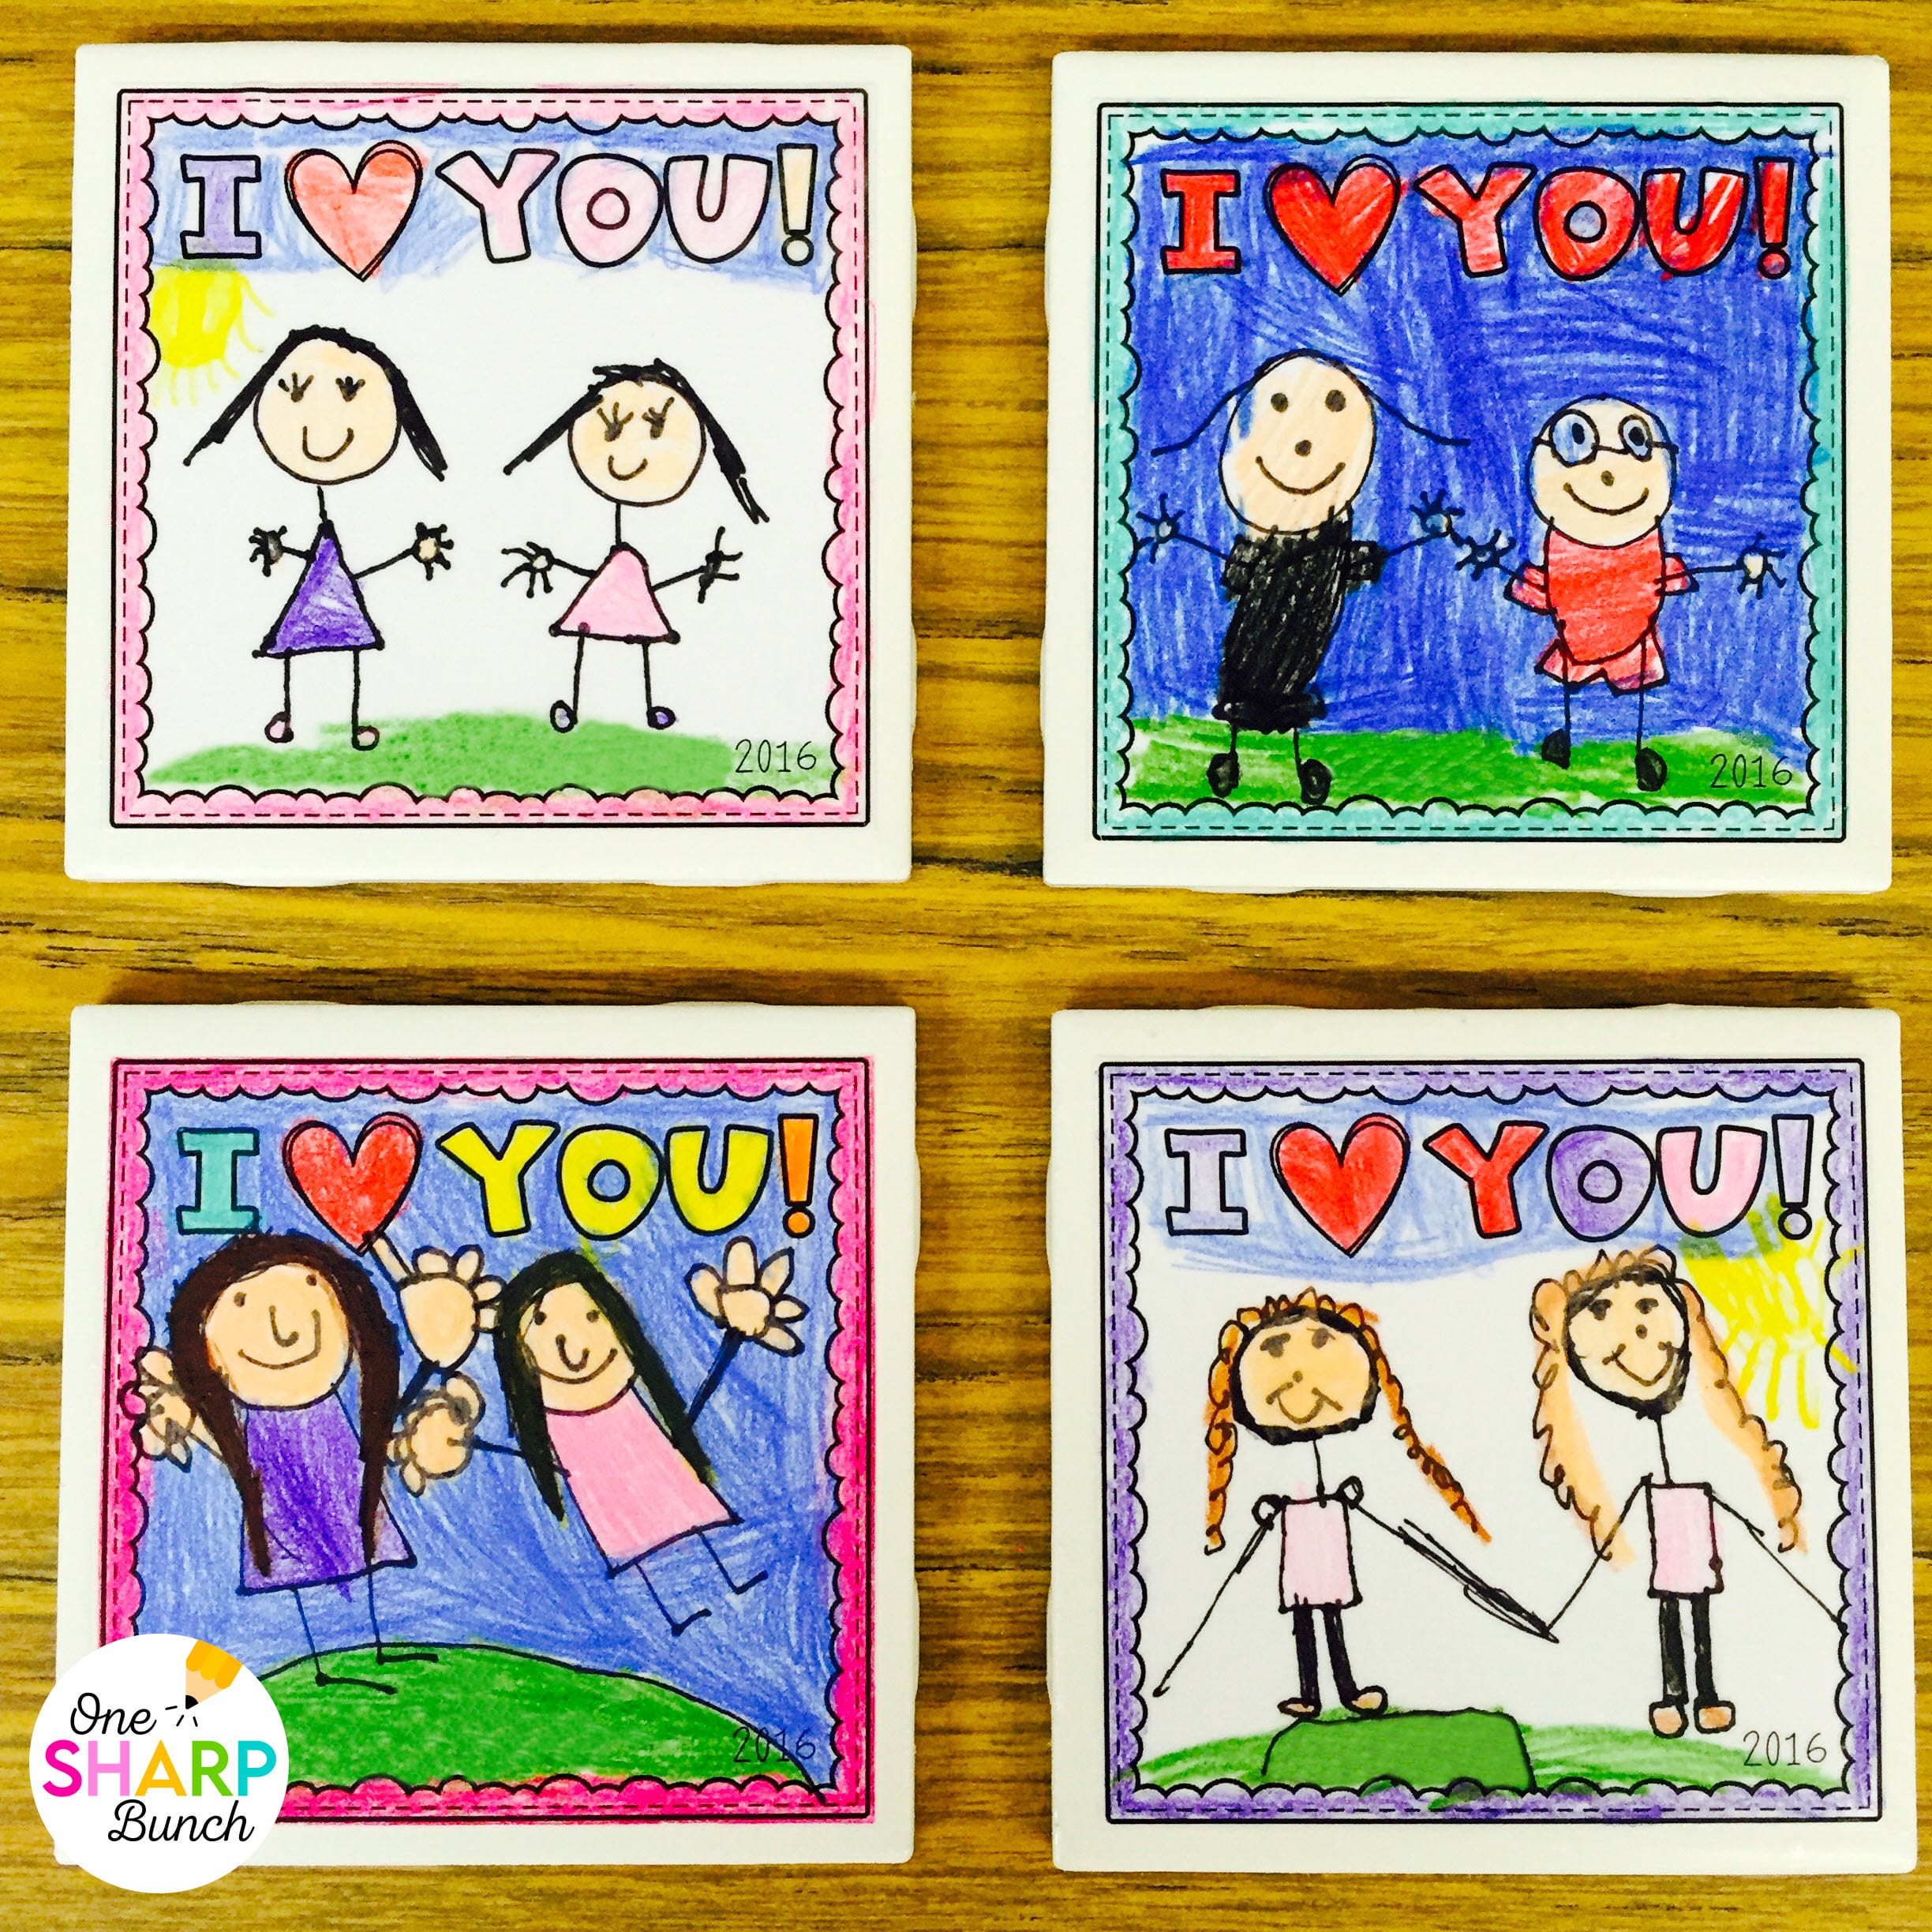 DIY tile coasters make the perfect Mother’s Day gift or Father’s Day gift from kids! These simple Mother's Day crafts or Father's Day crafts make the cutest homemade gift for Mother’s Day and gift for Father’s Day. With just Mod Podge, ceramic tiles, and a few classroom supplies, you can create this adorable DIY Mother's Day gift. This budget friendly craft for Mother's Day or Father's Day will be a treasured keepsake! Learn how to make these DIY tile coasters for Mother’s Day and Father's Day!